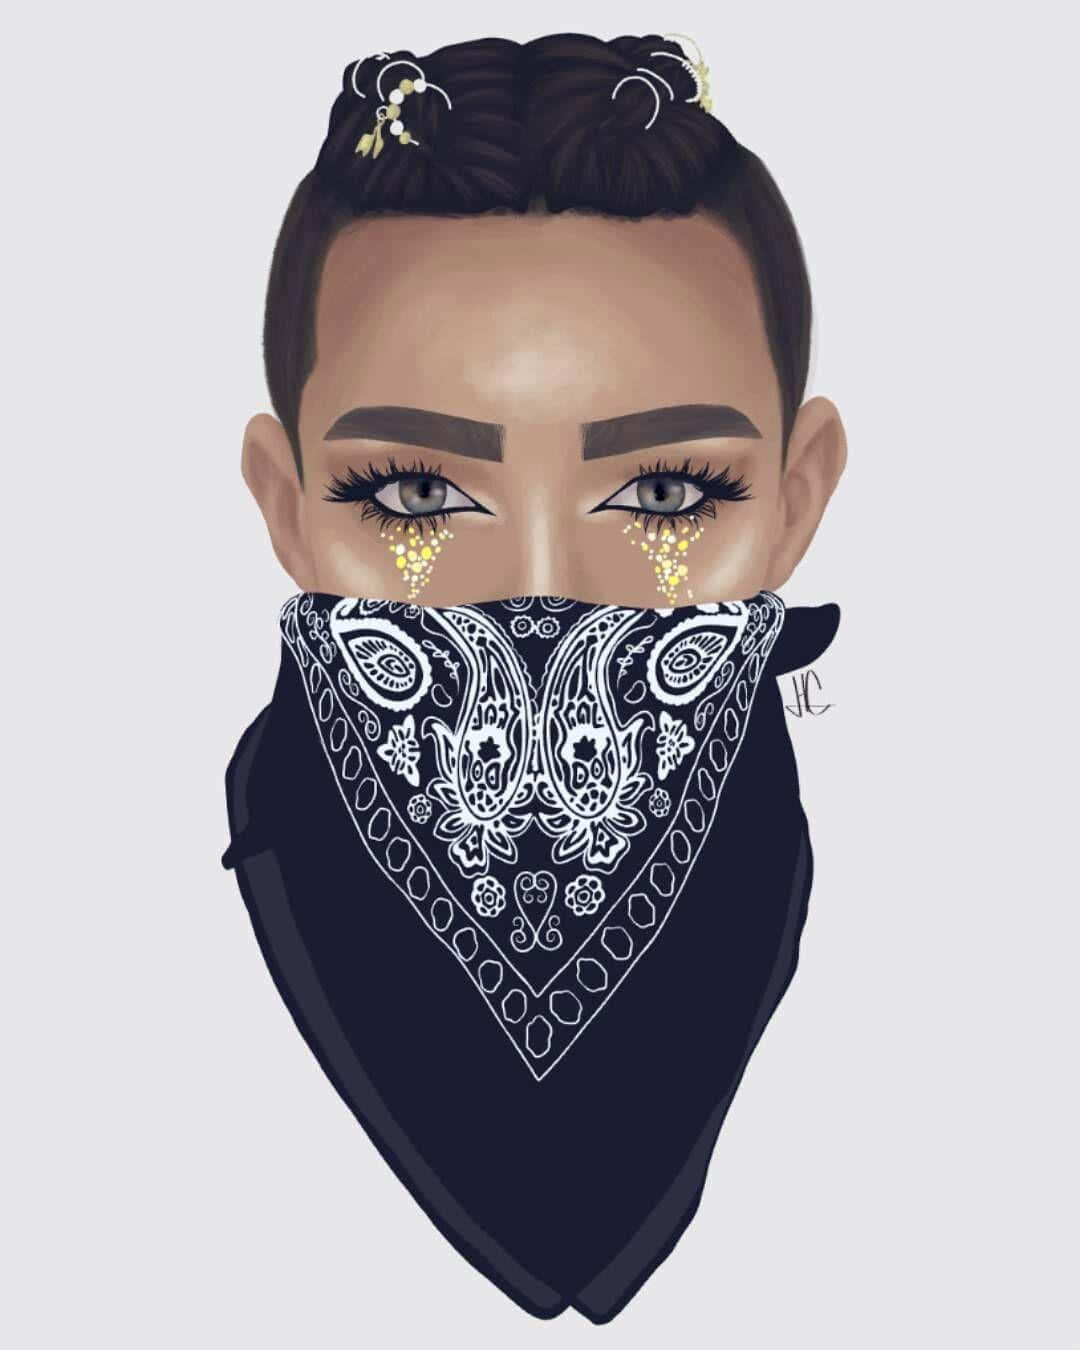 A Black Woman With A Bandana On Her Face Wallpaper